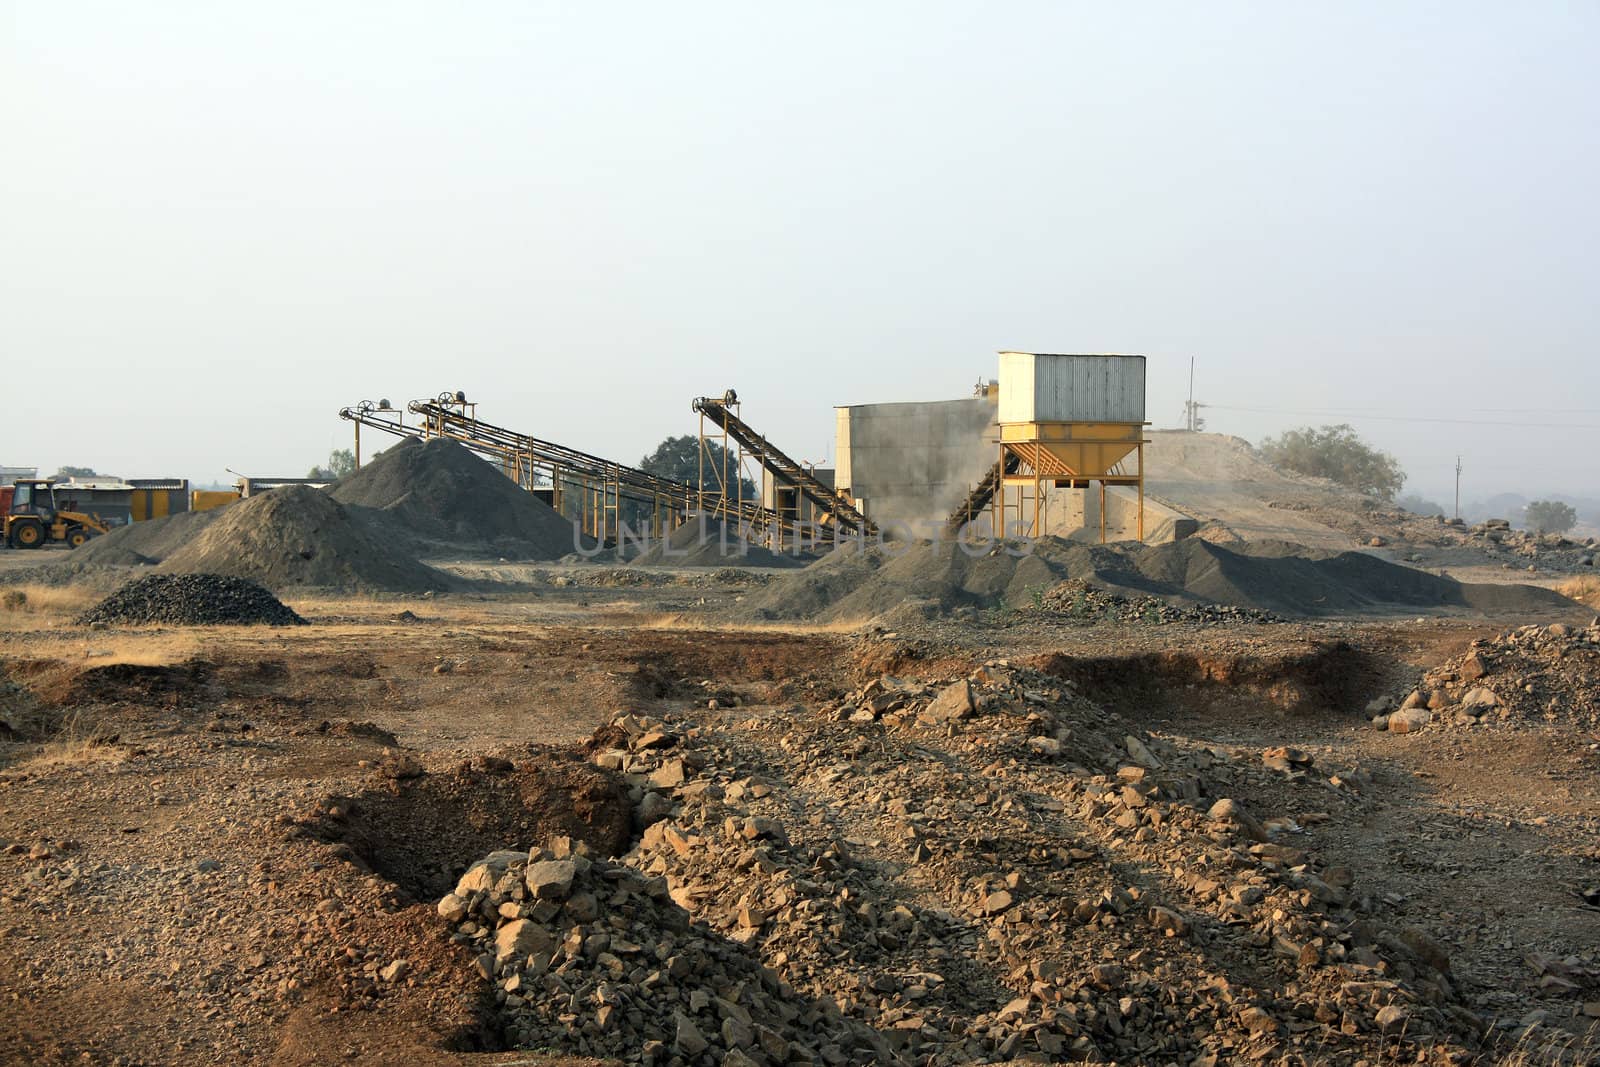 A huge stone quarry / mining site in India.